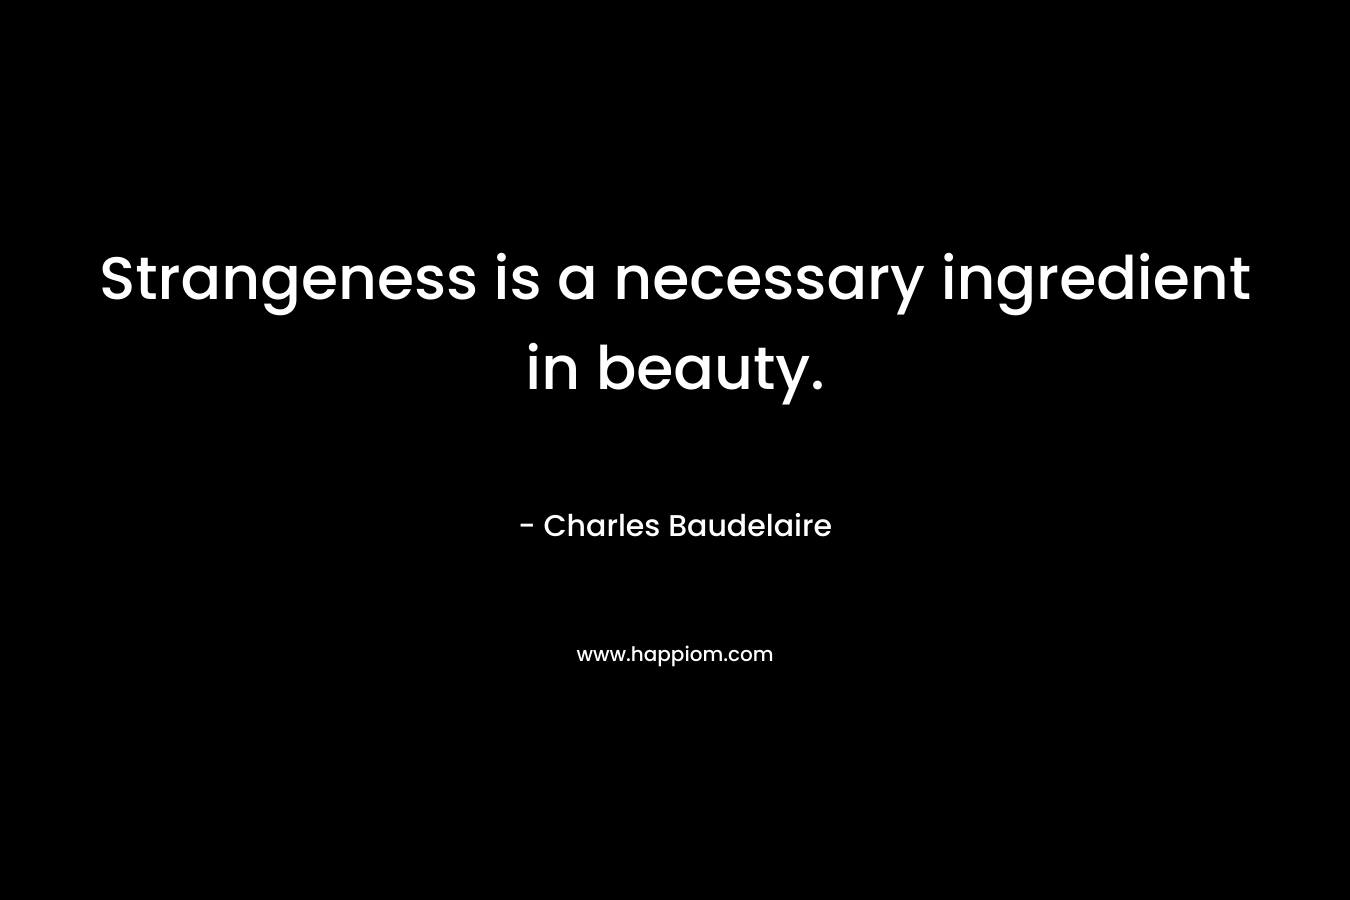 Strangeness is a necessary ingredient in beauty. – Charles Baudelaire